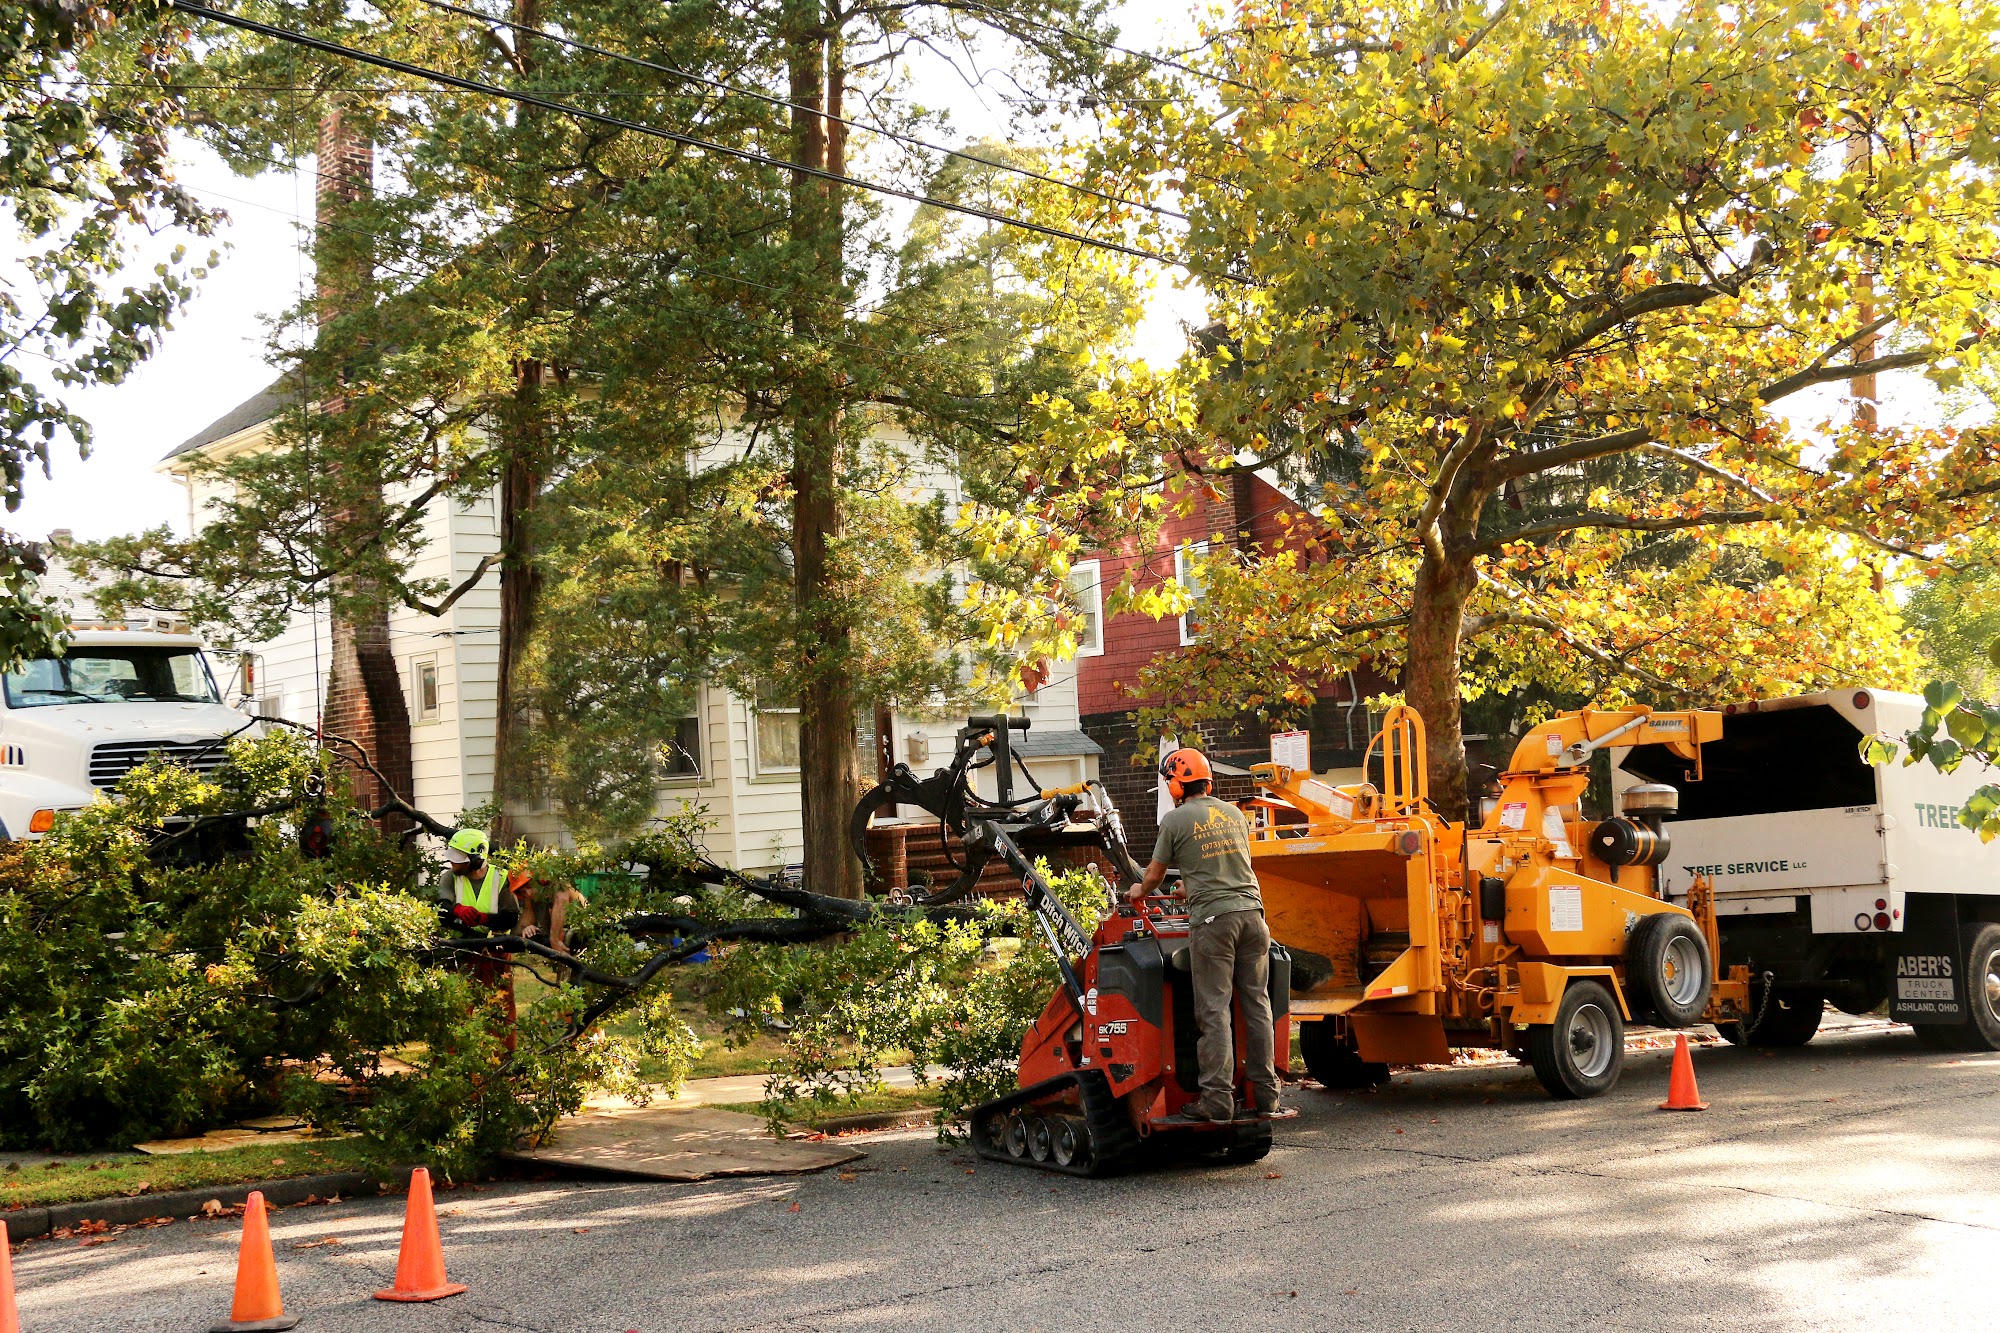 Arbor Ace Tree Service 12 Old Ln Ext, Montville New Jersey 07082